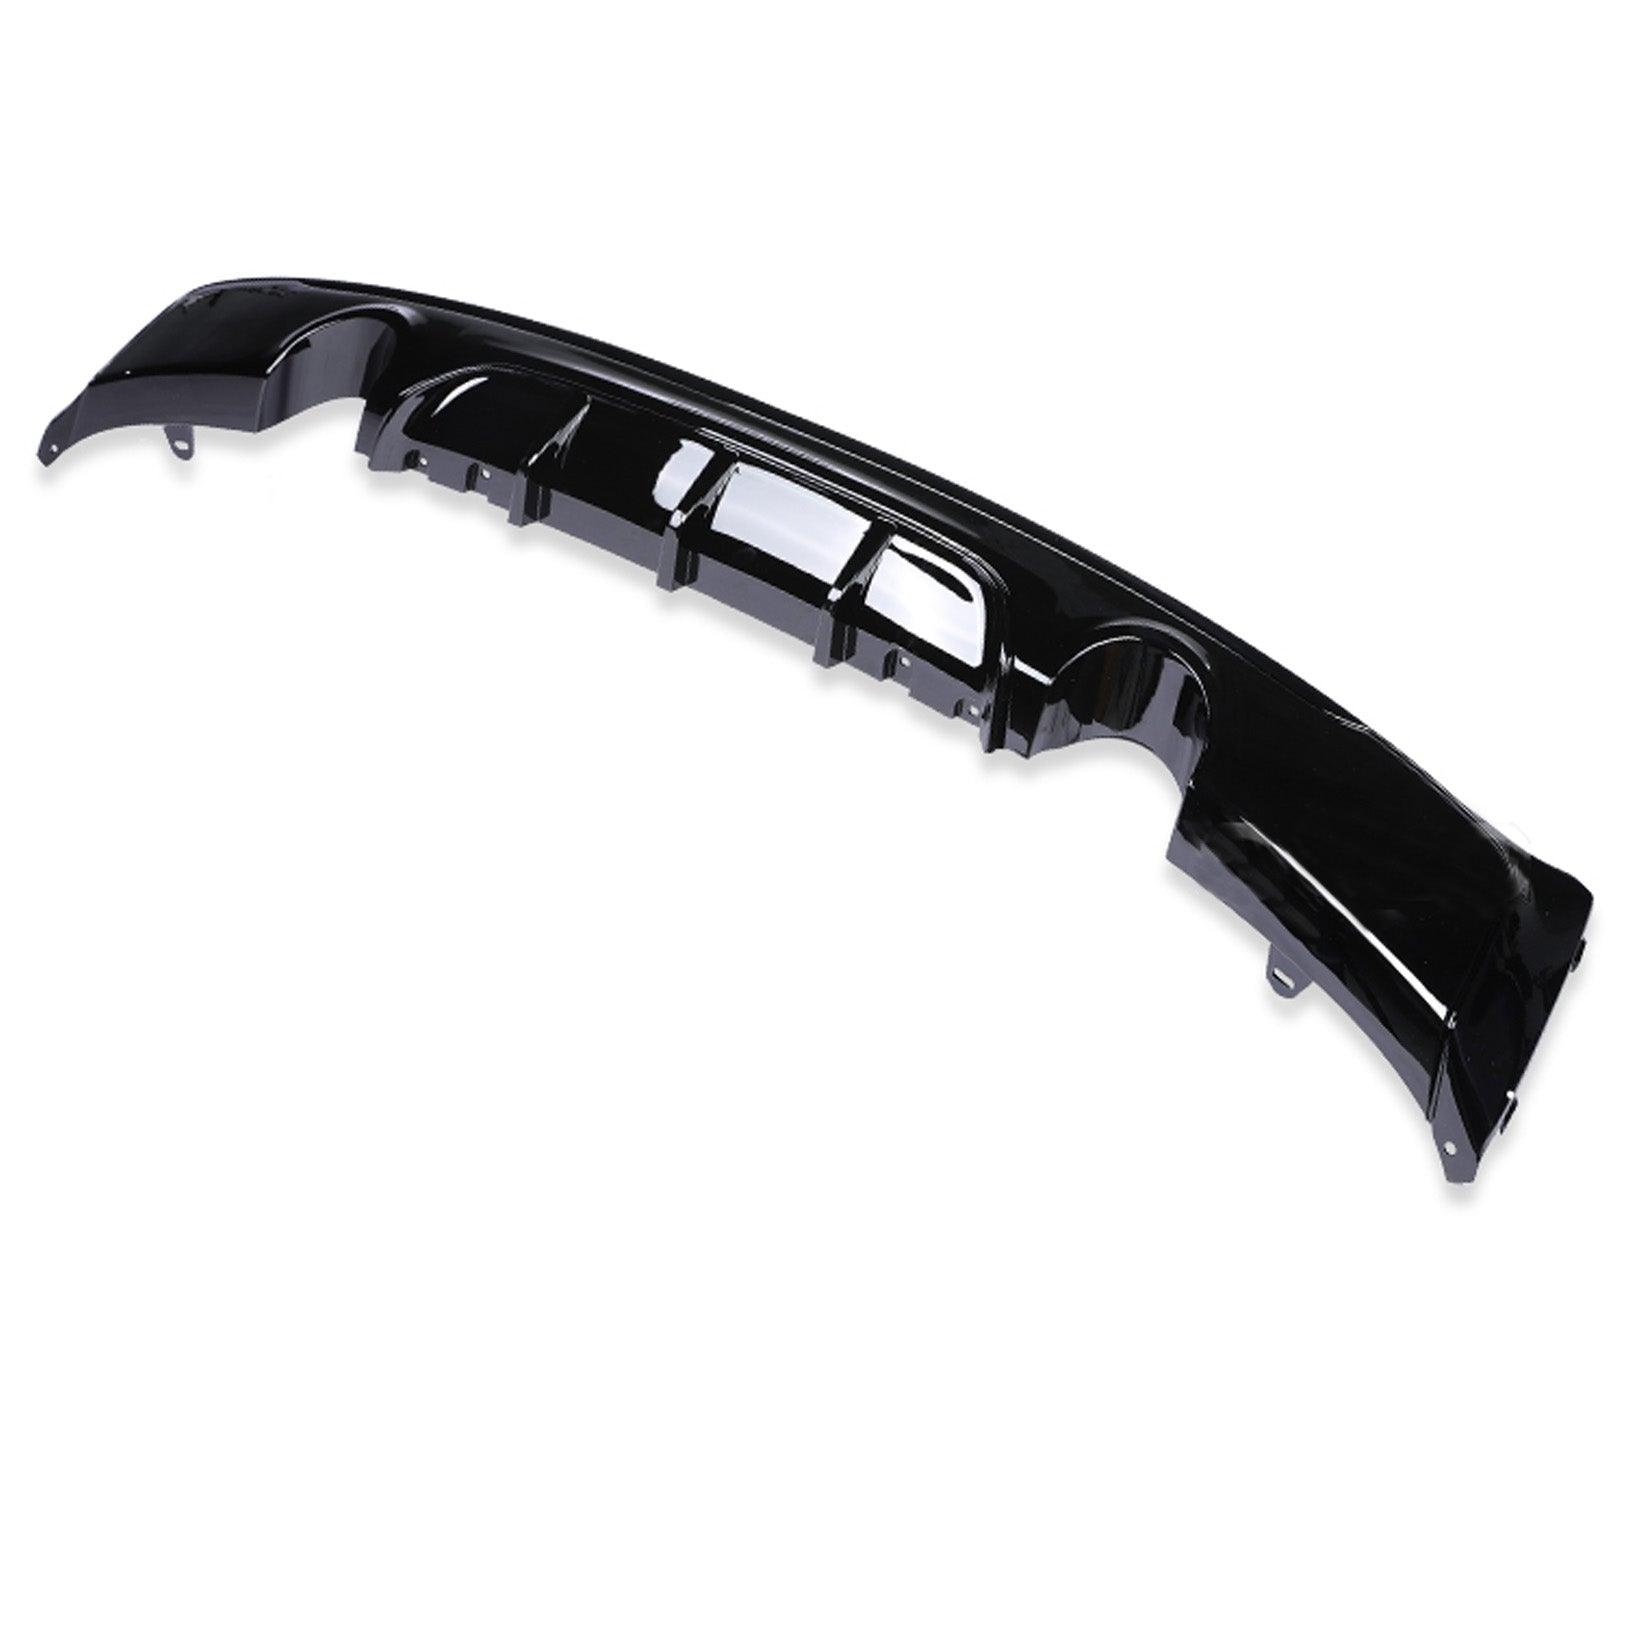 BMW 2 SERIES F22 13-18 REAR DIFFUSER 0___0 - DUAL SINGLE EXIT IN GLOSS BLACK - RisperStyling